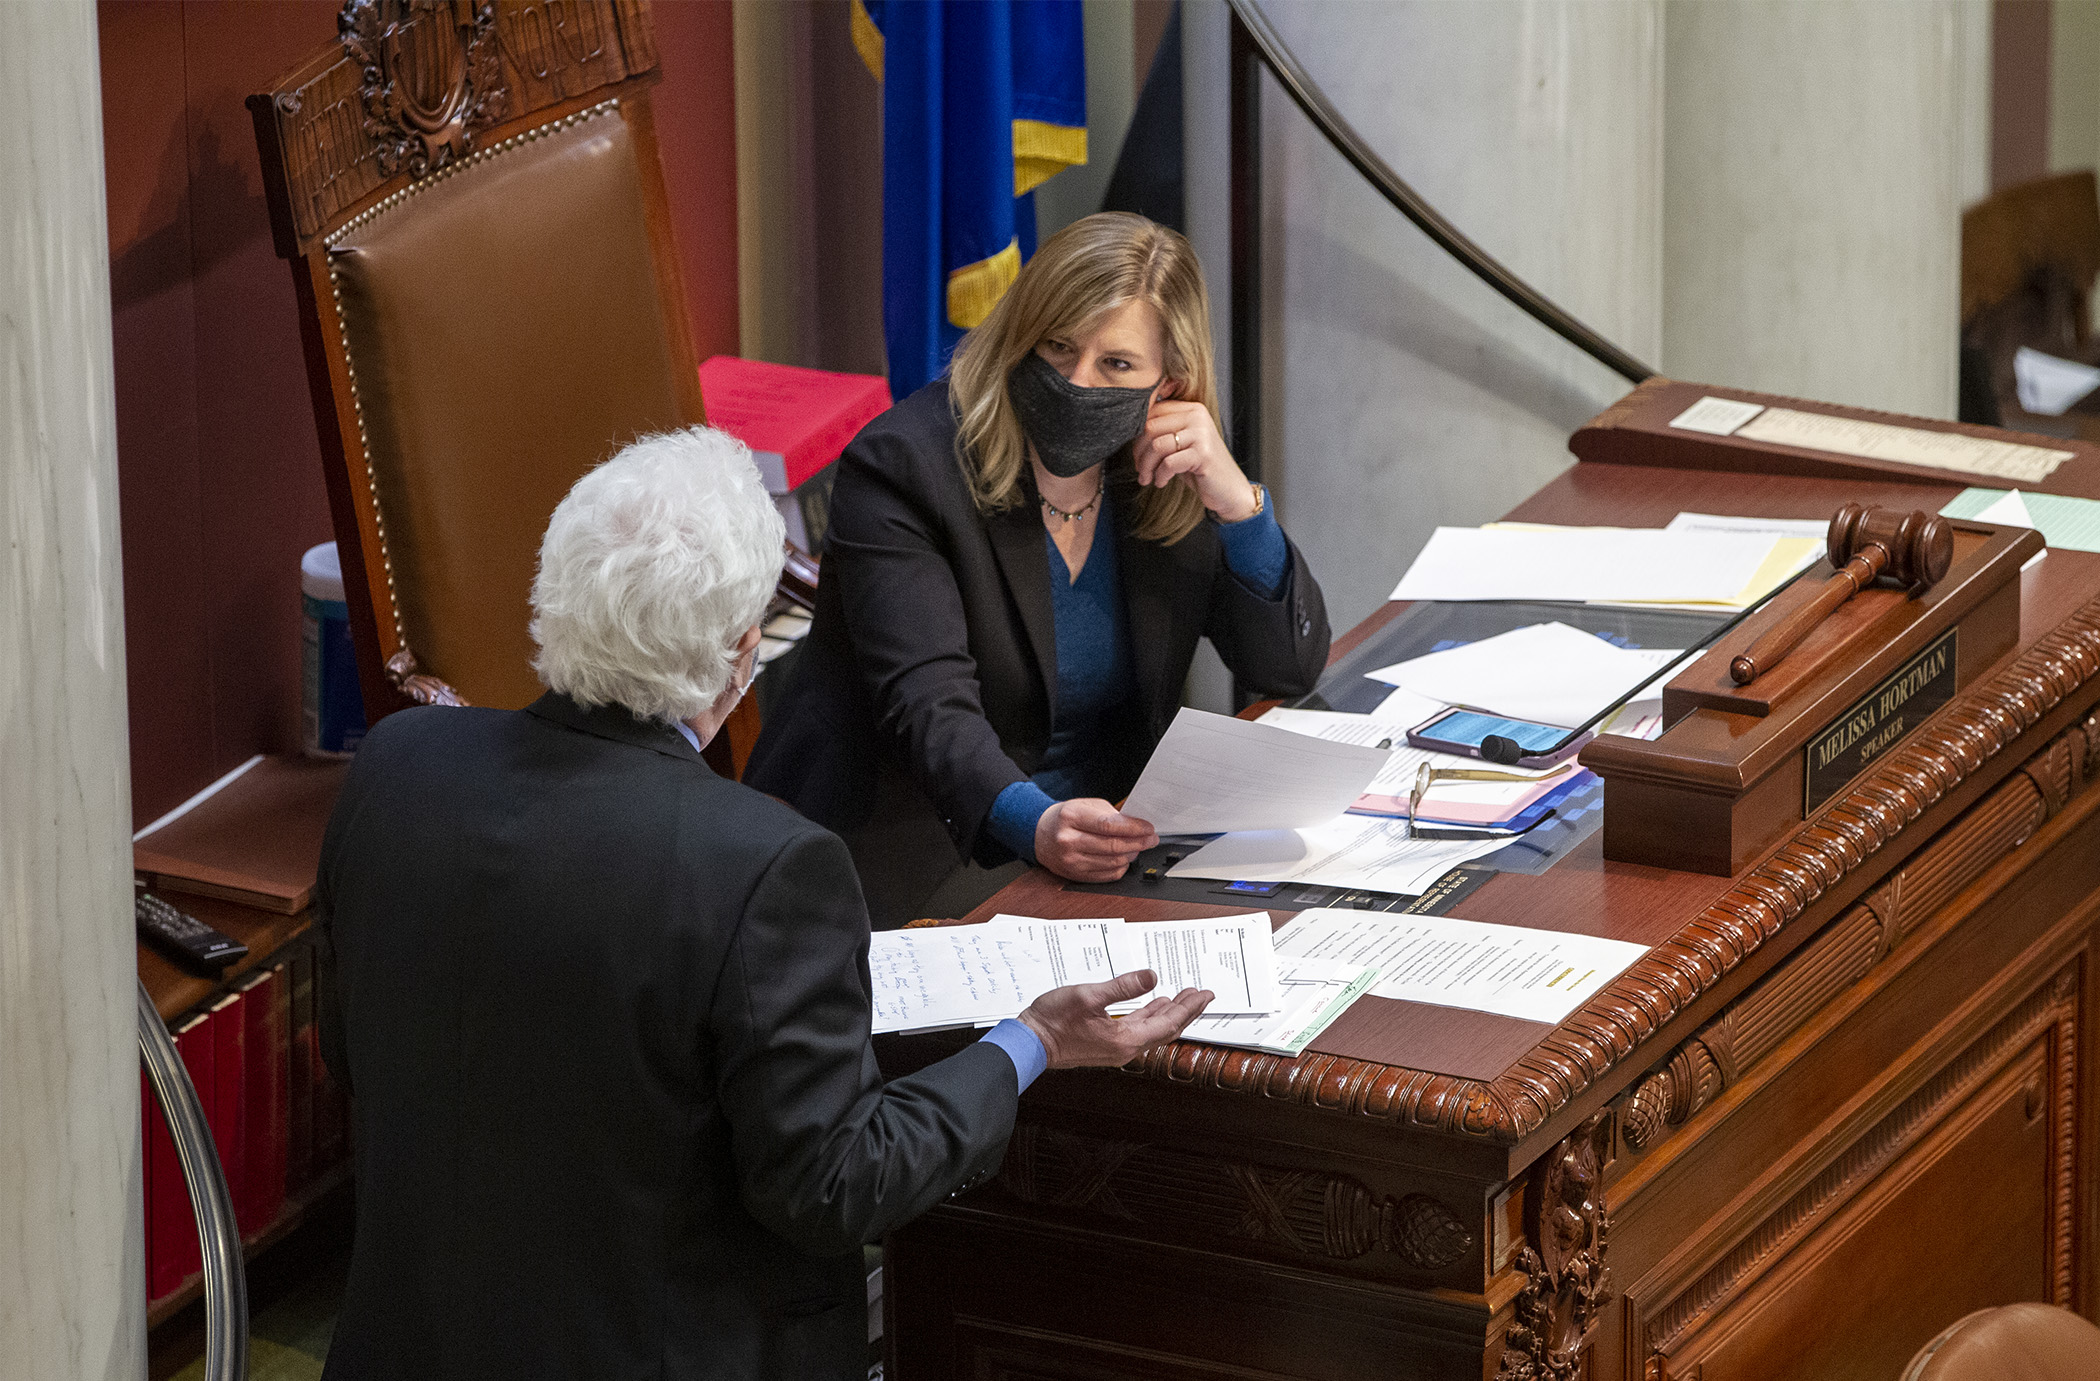 House Speaker Melissa Hortman confers with Chief Clerk Pat Murphy during the House floor session May 15. Photo by Paul Battaglia